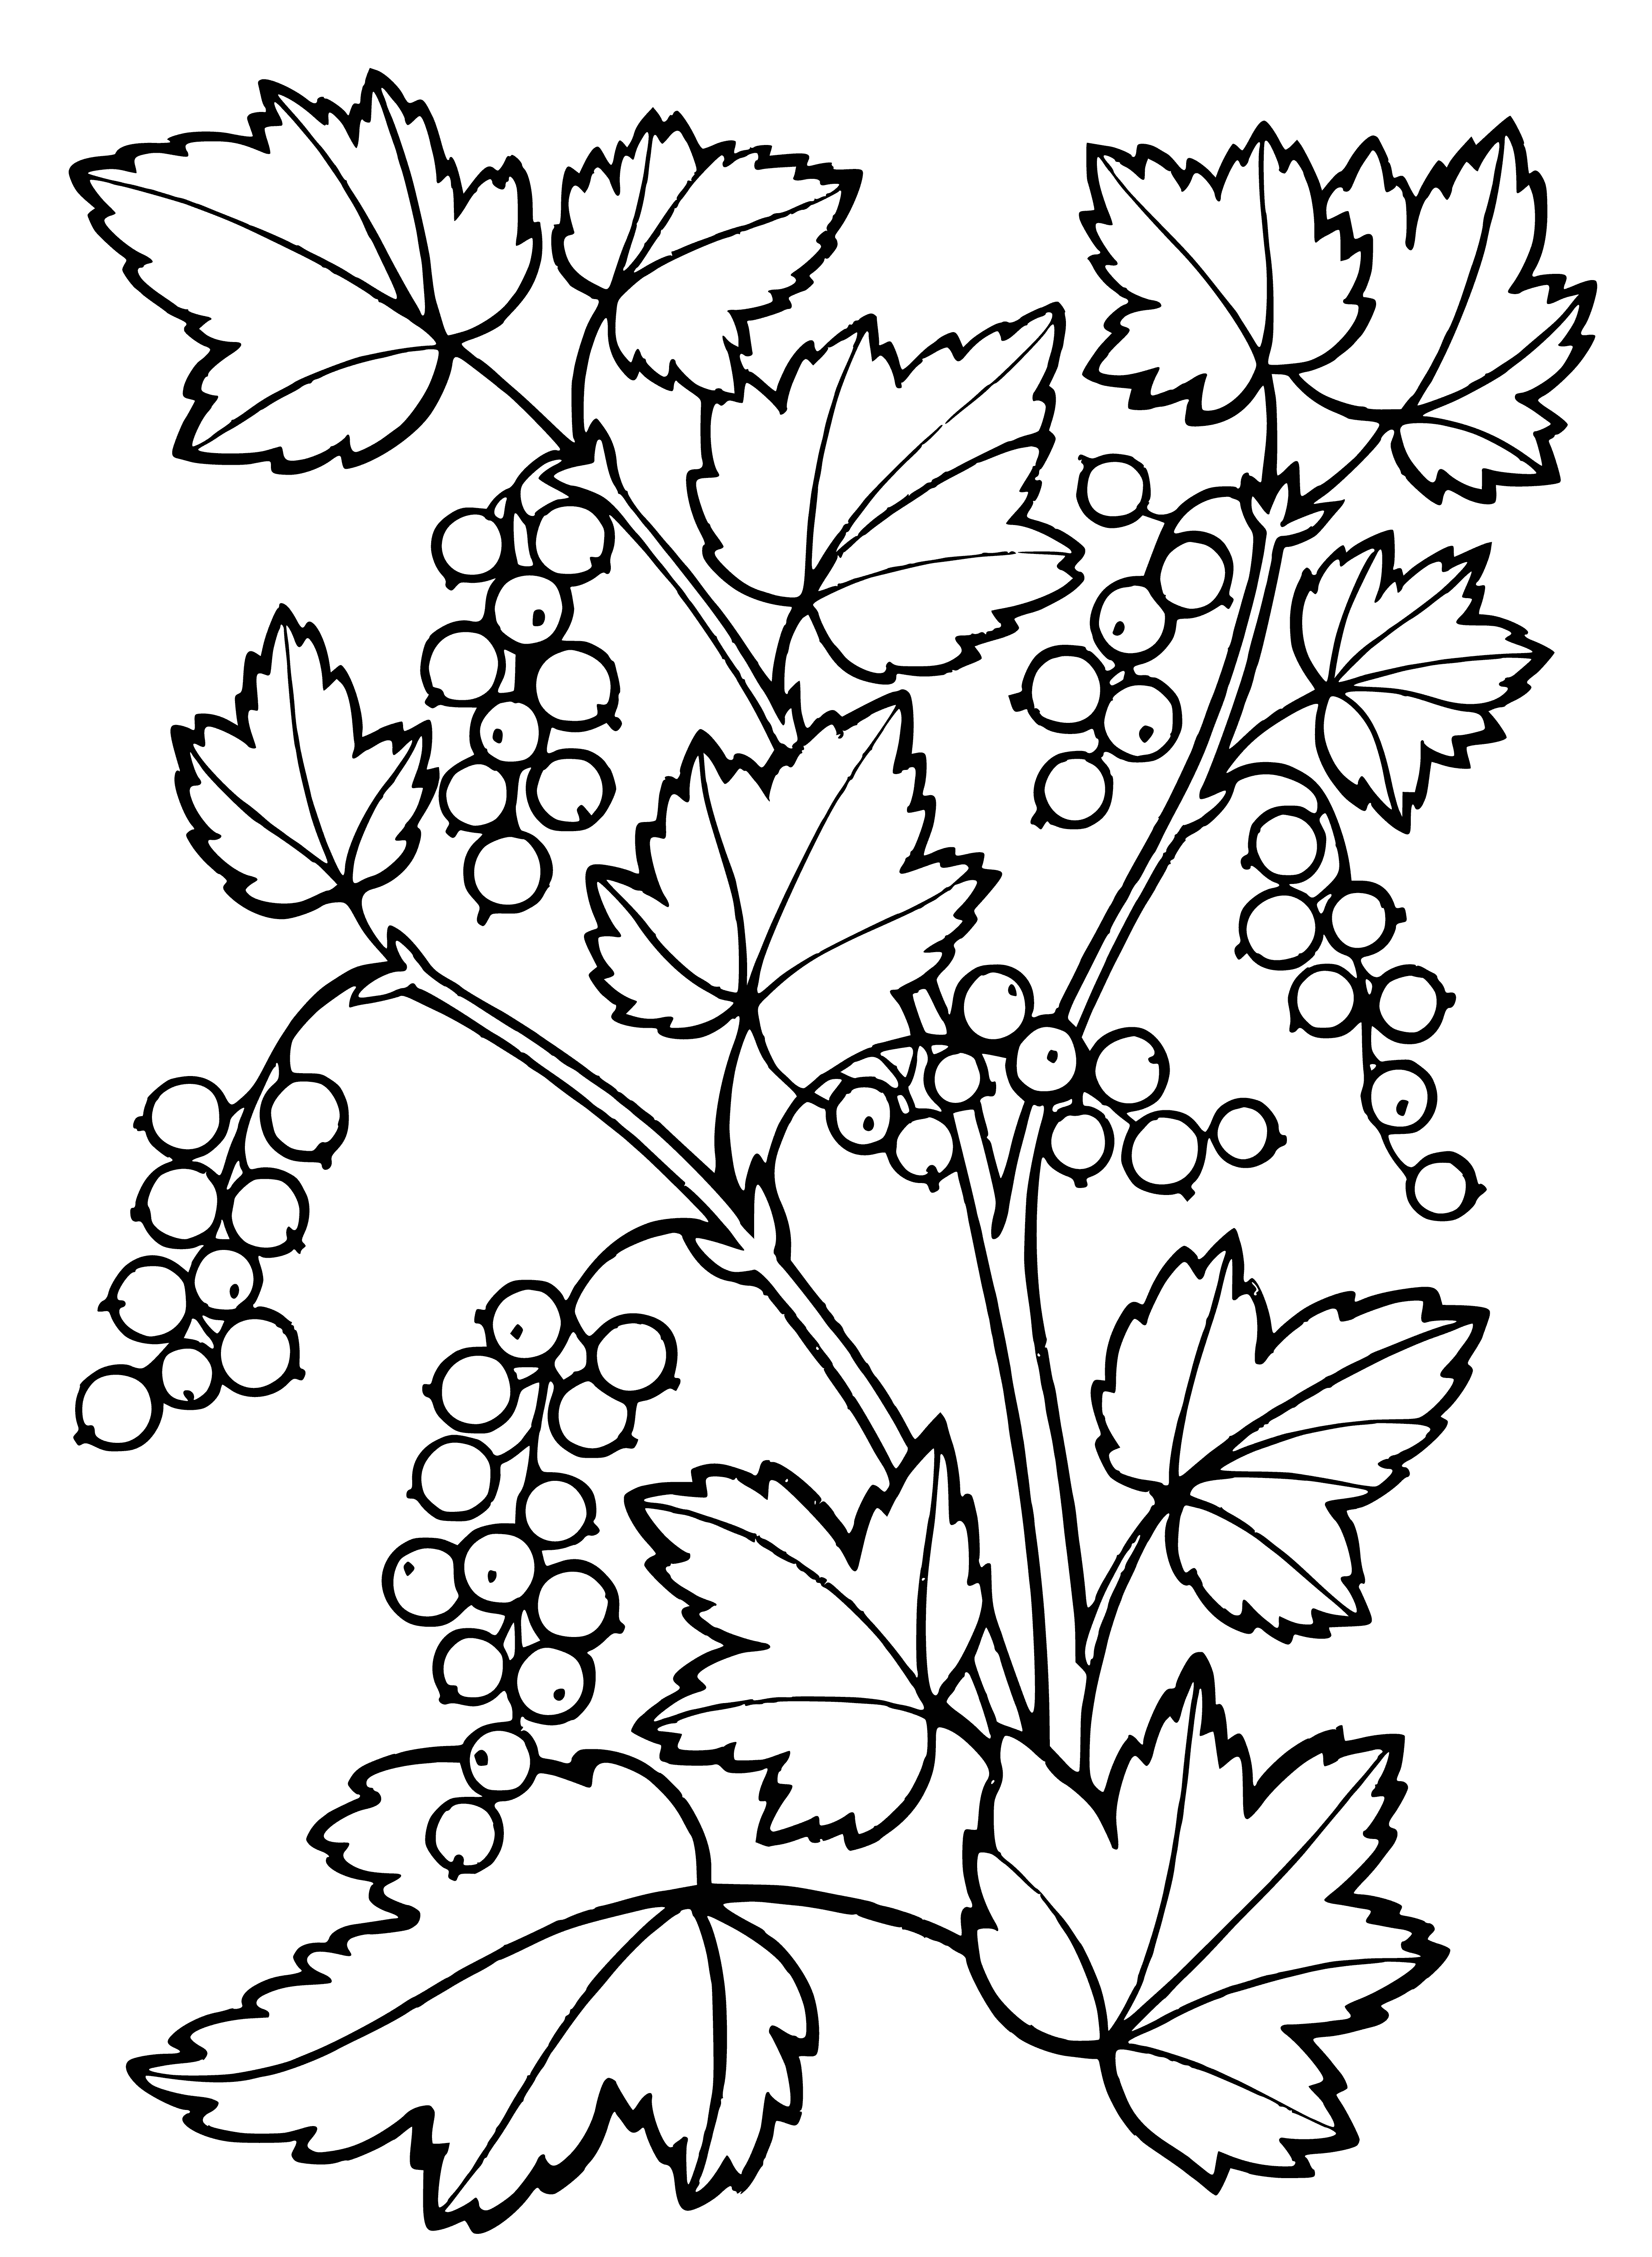 coloring page: A currant bush with long, thin branches and small black berries, some turning red. Leaves are small and oval-shaped.